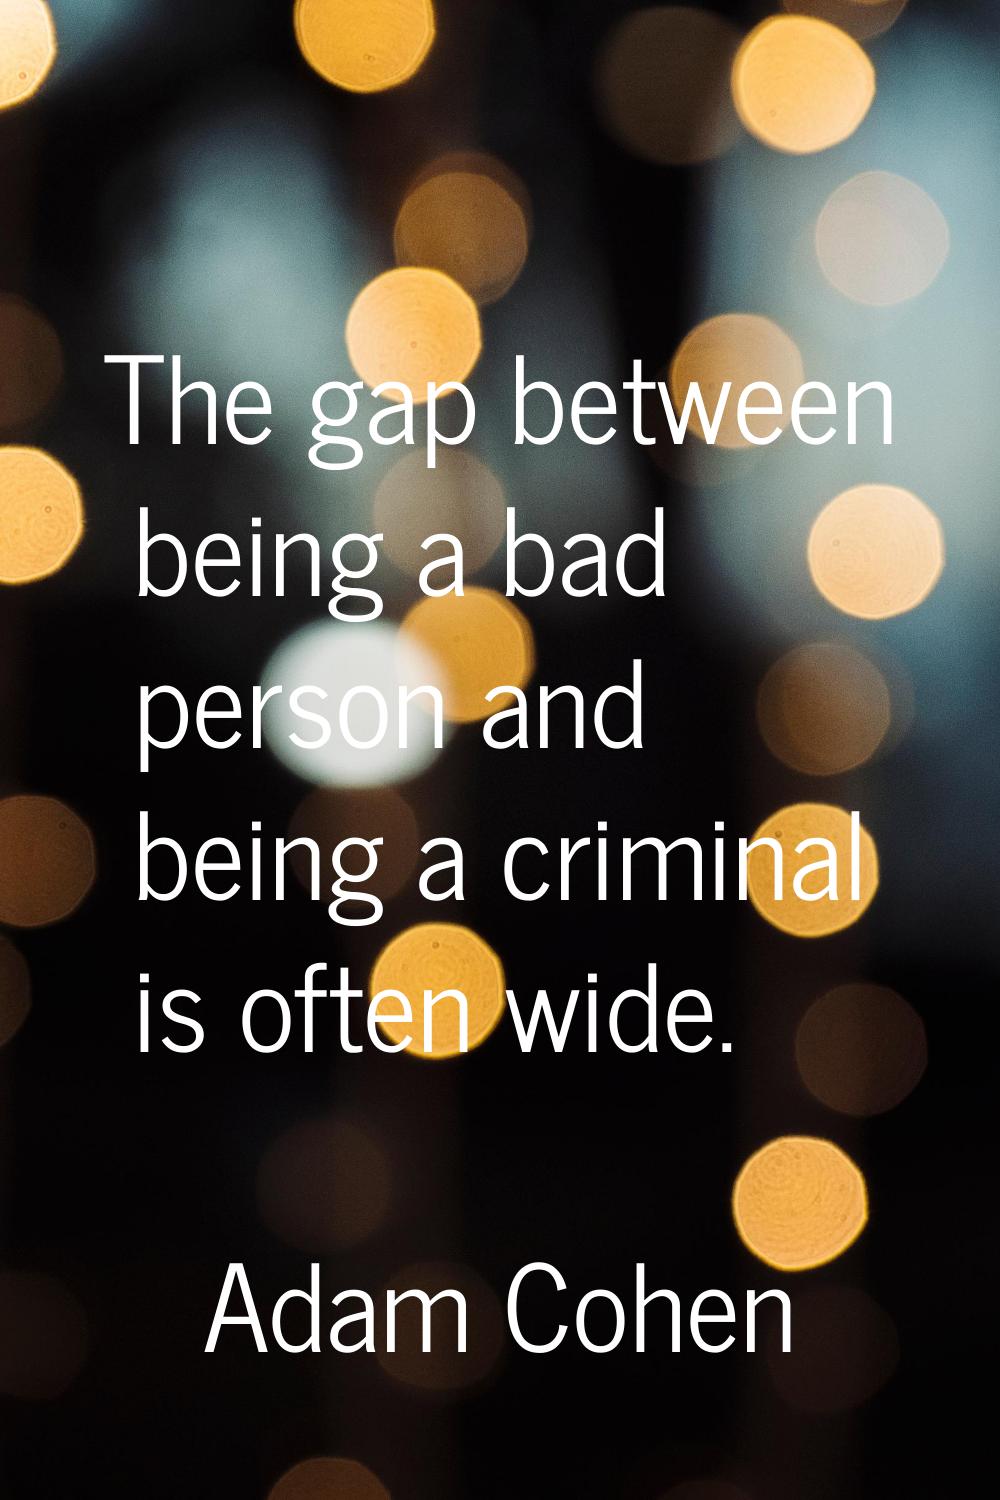 The gap between being a bad person and being a criminal is often wide.